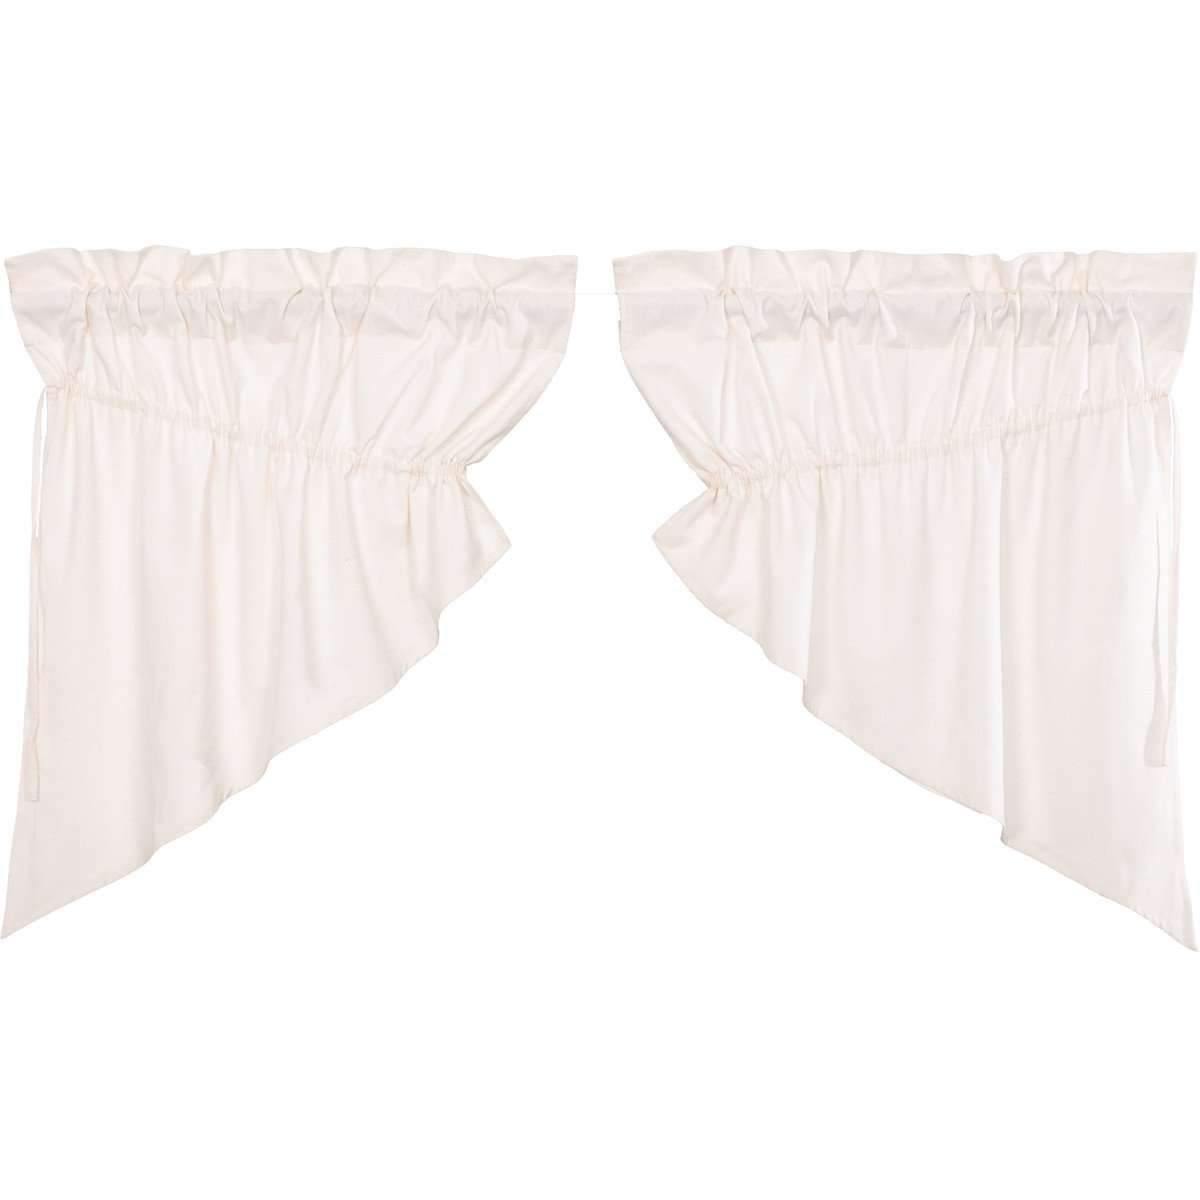 Simple Life Flax Antique White Prairie Swag Curtain Set of 2 36x36x18 VHC Brands online